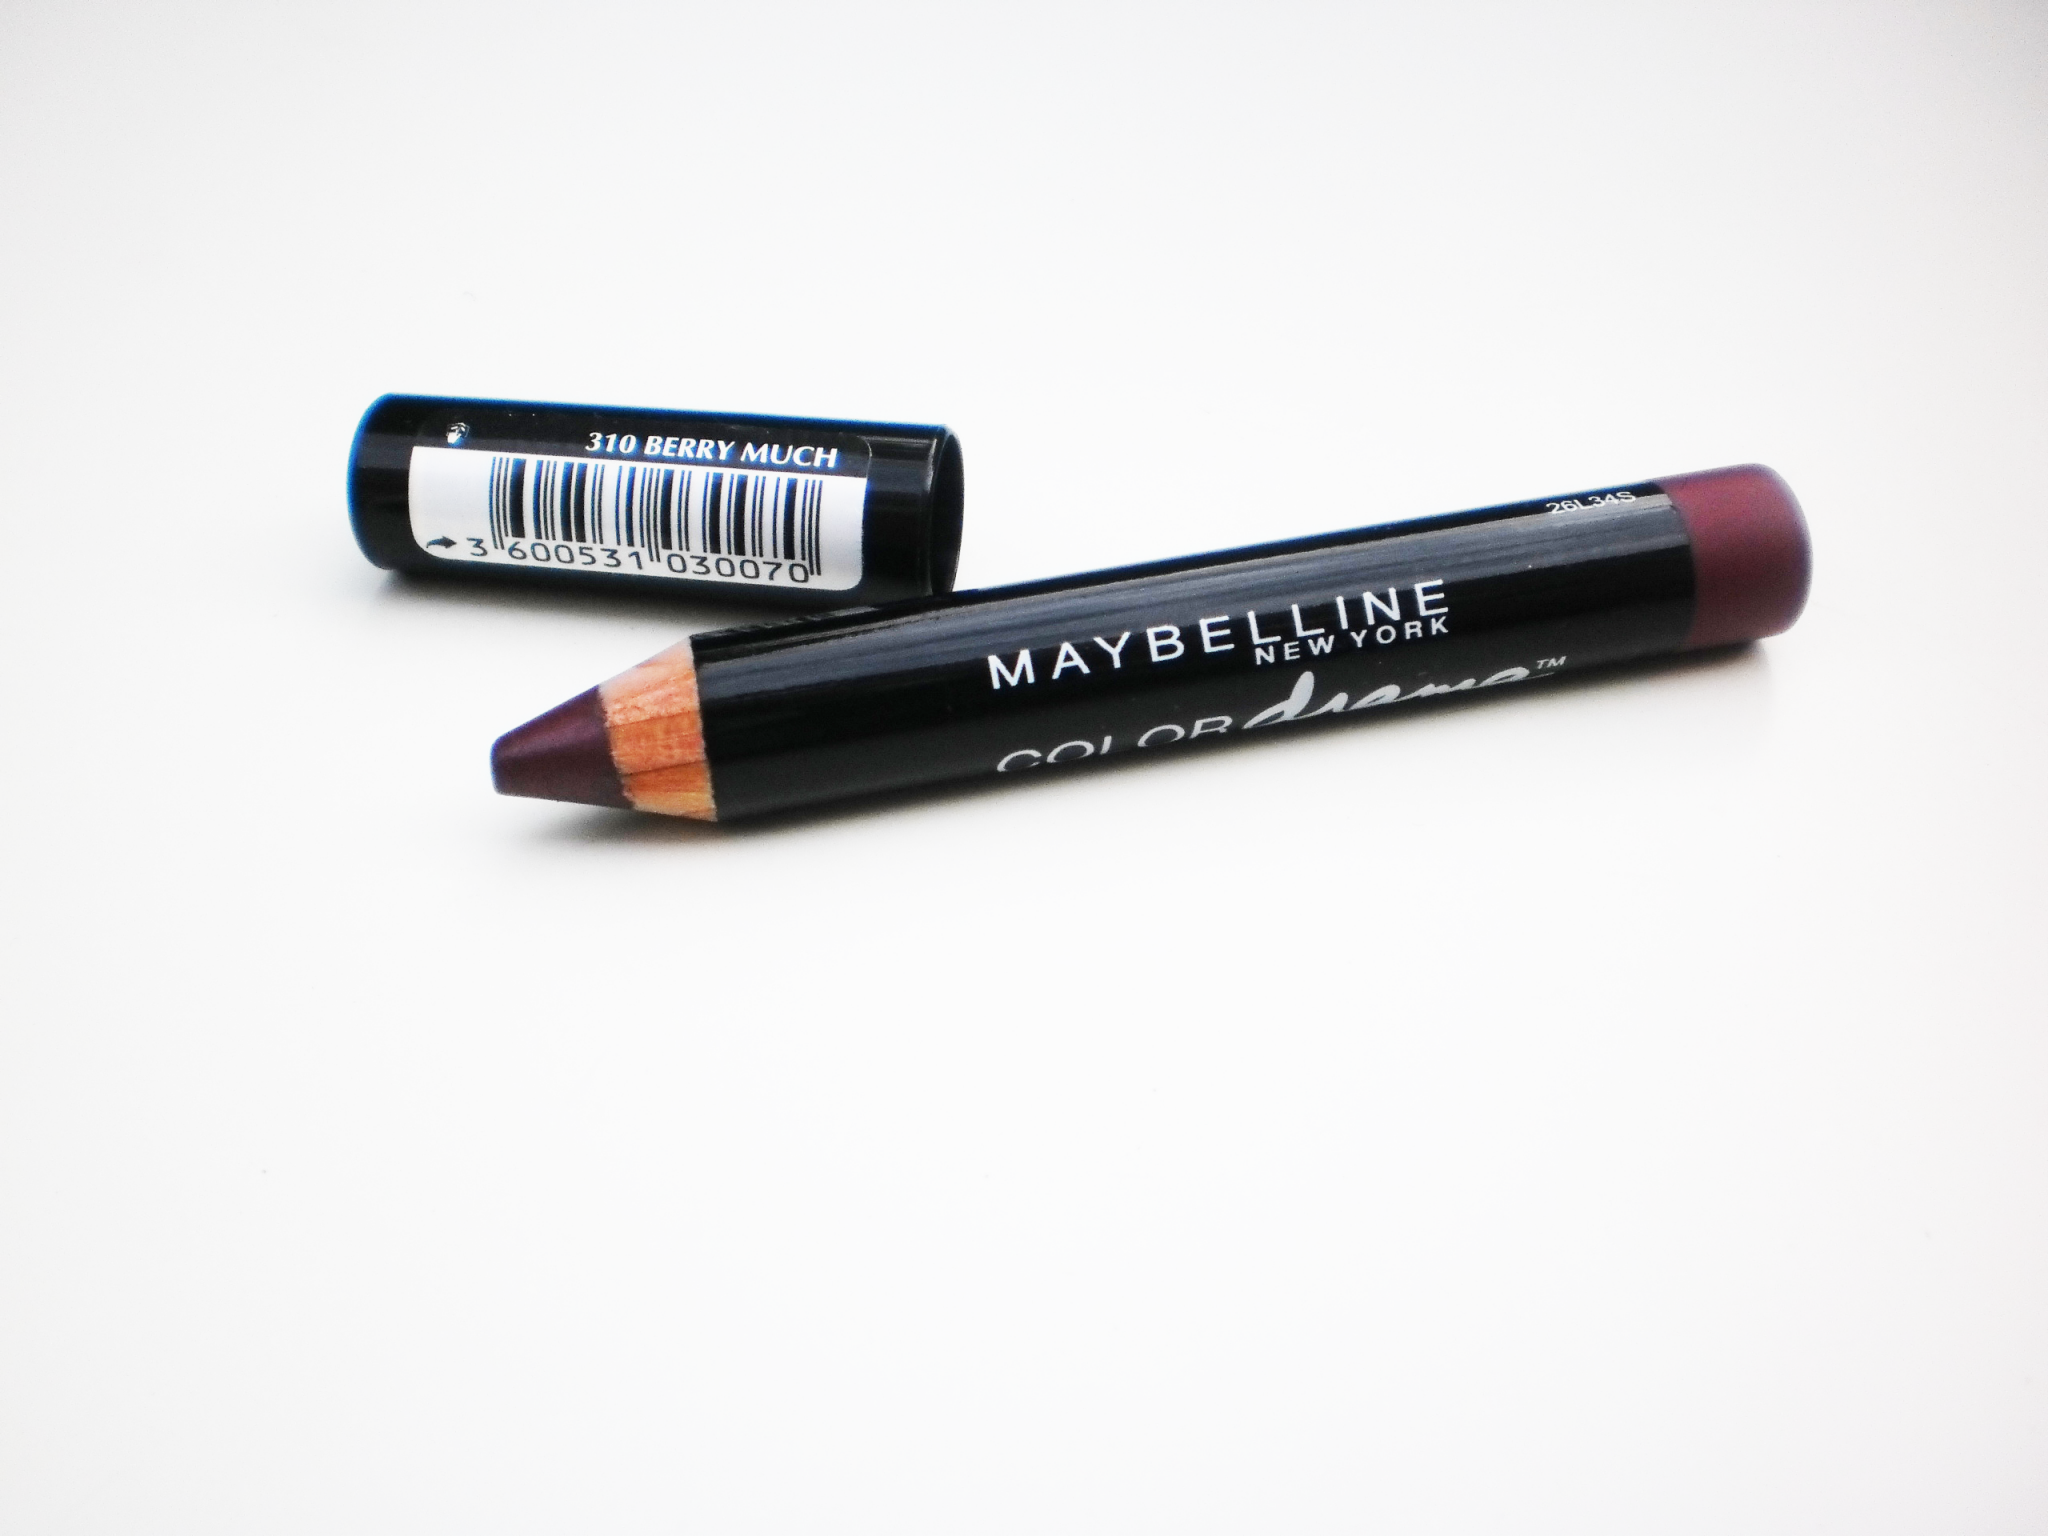 Review: Maybelline Color Drama #310 Berry Much